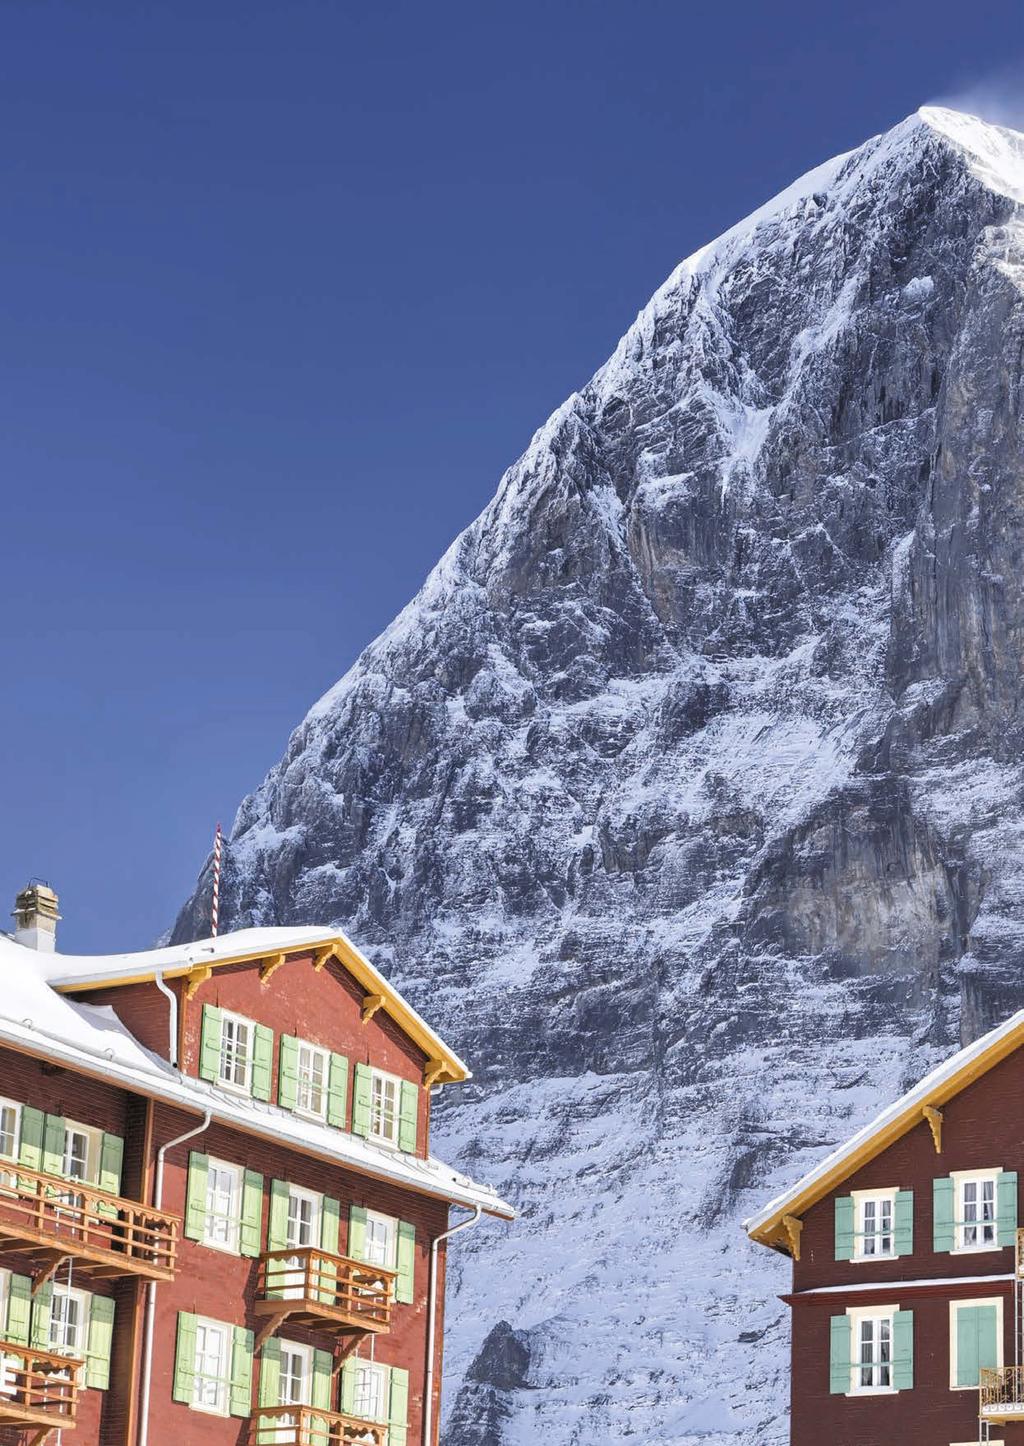 The iconic Eiger hotel in Switzerland where Geberit s concealed cisterns were installed in 1964 and were